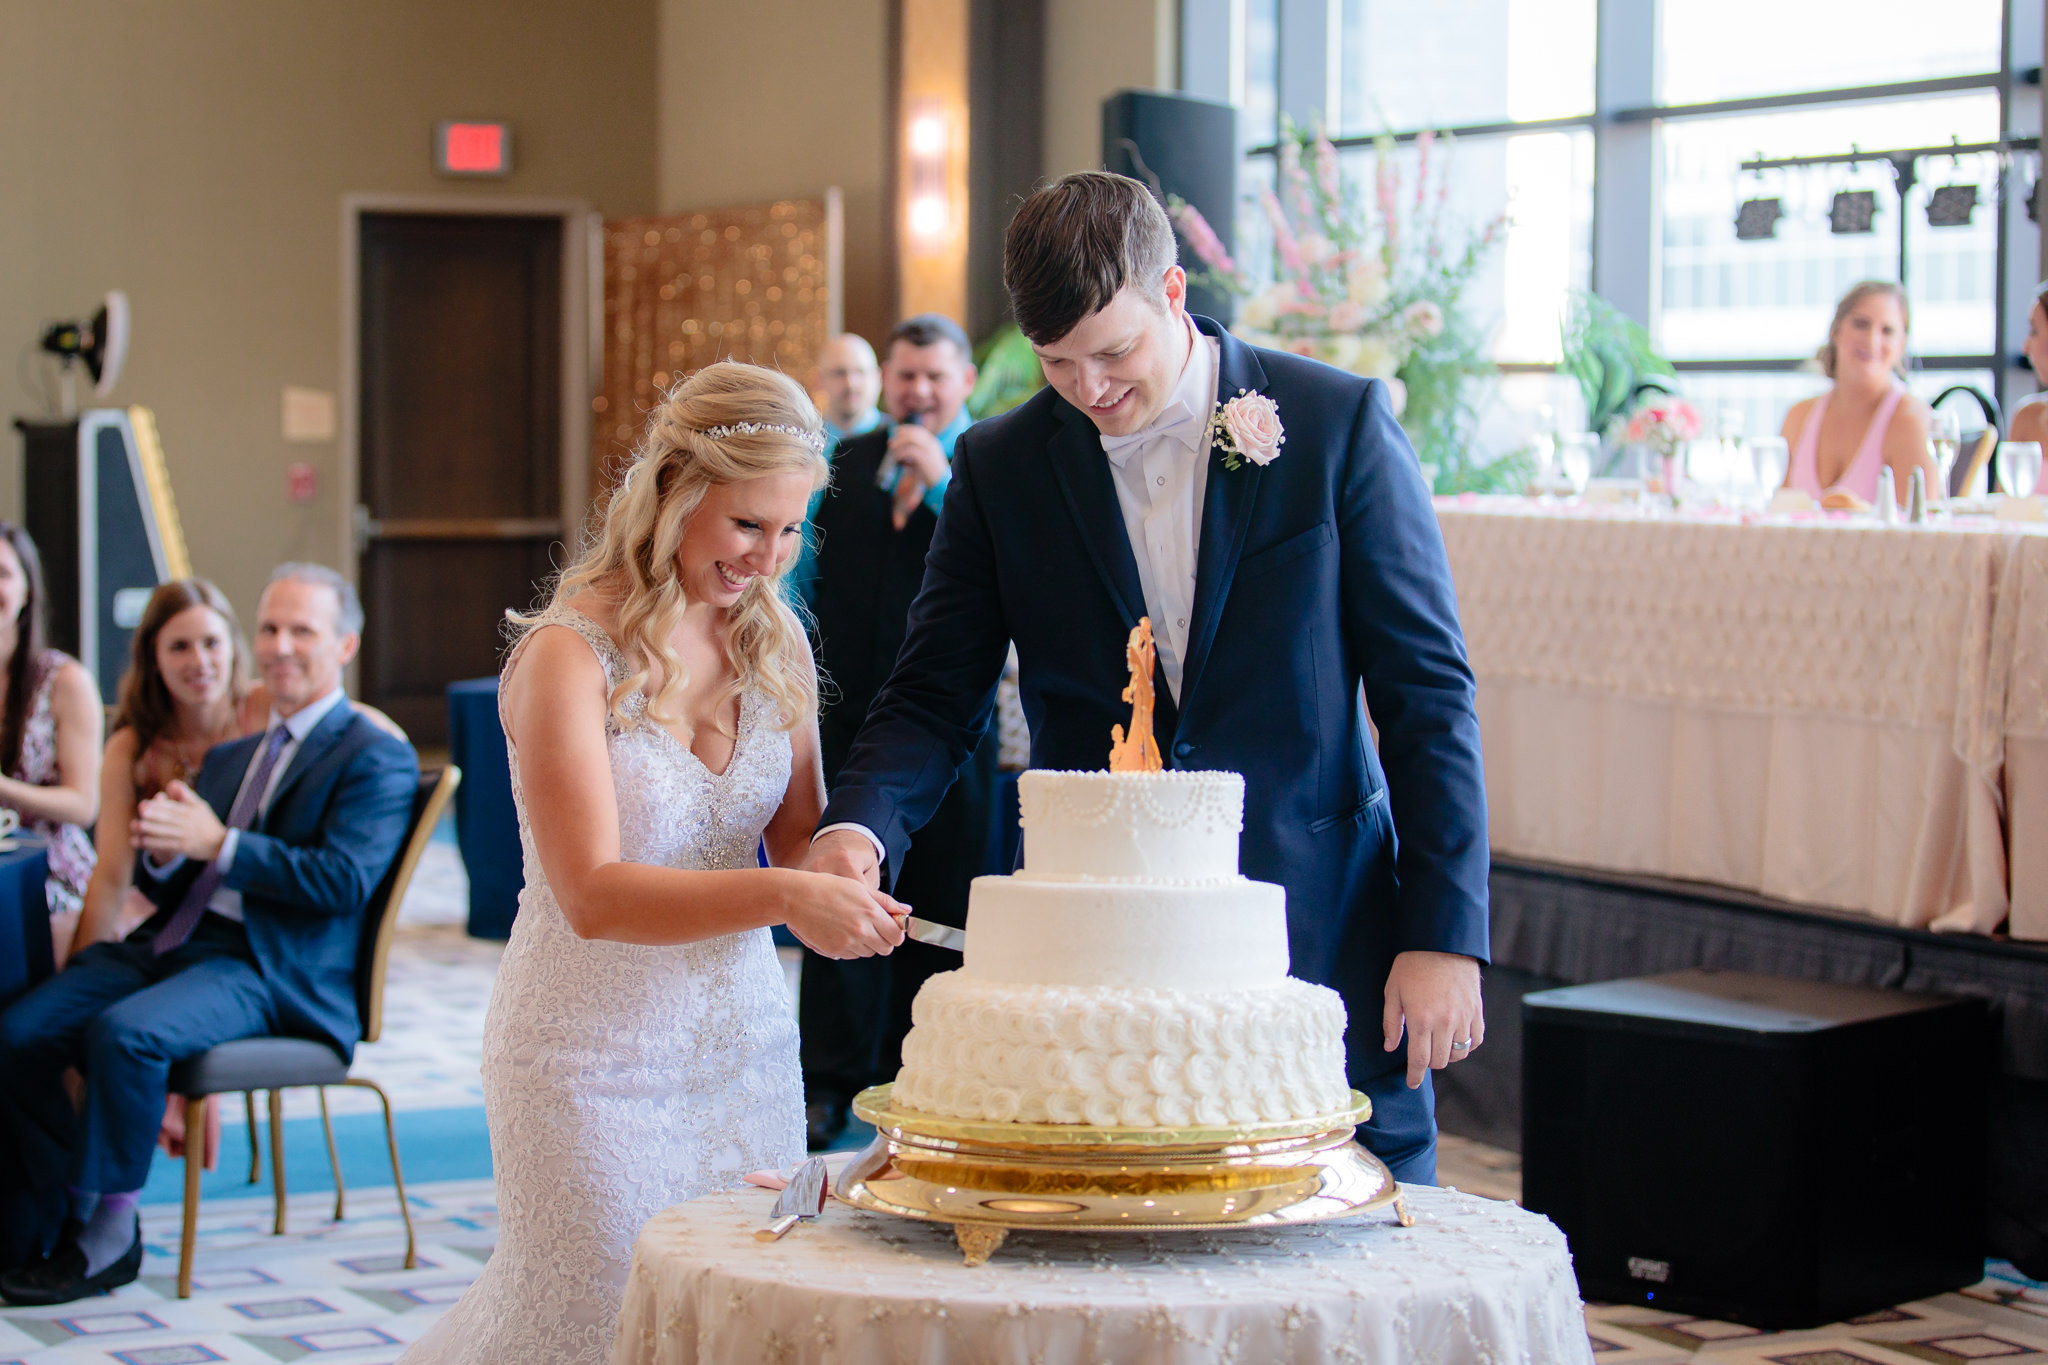 Newlyweds cut the cake at their Duquesne University wedding